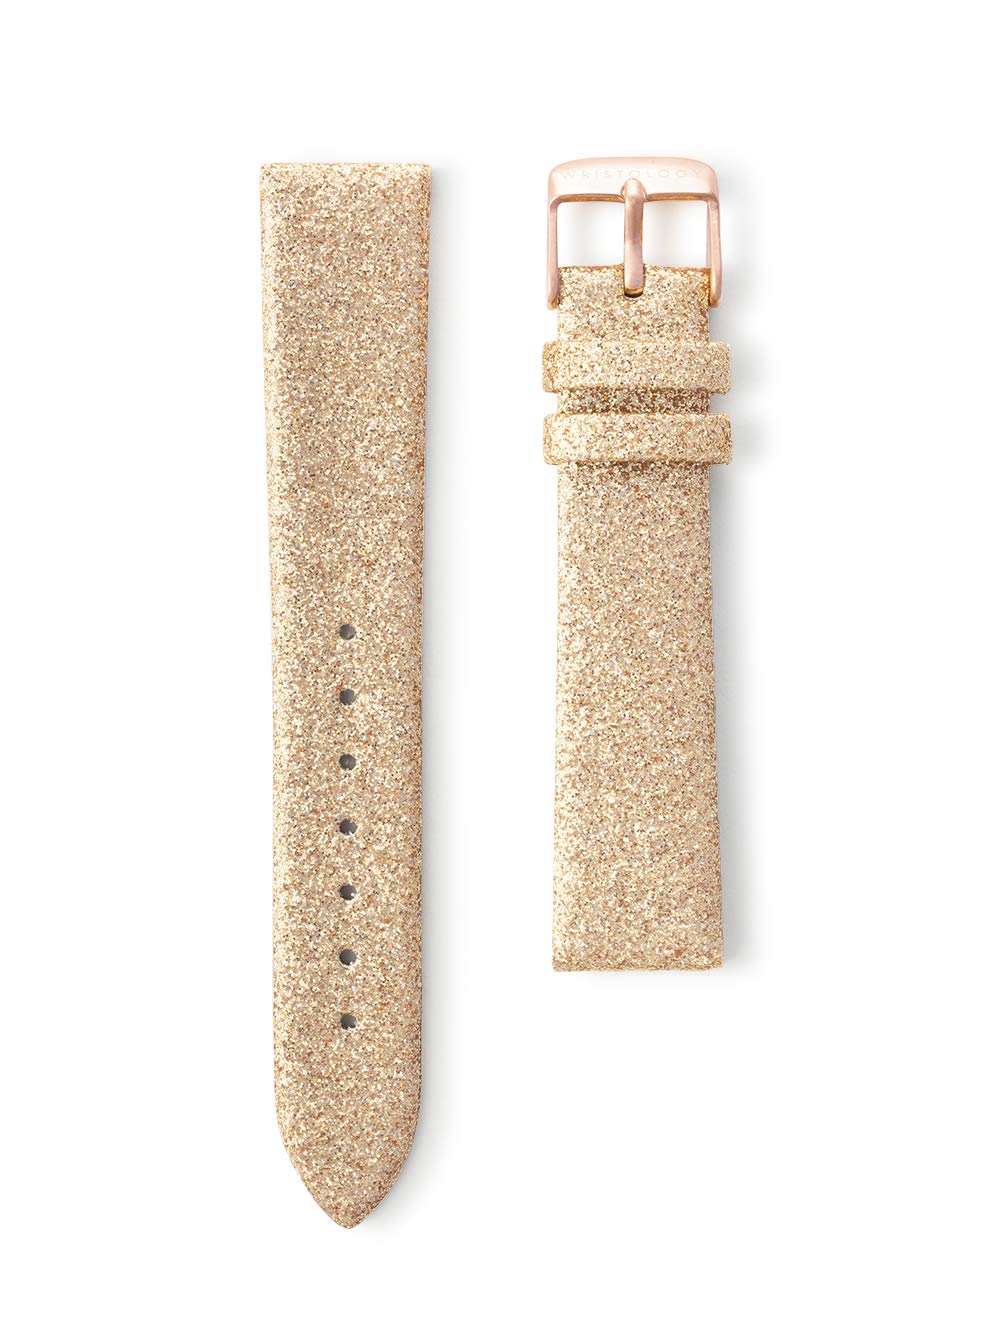 WRISTOLOGY Gold Glitter Leather 18mm Watch Band - Quick Release Easy Change Mens | Womens Strap